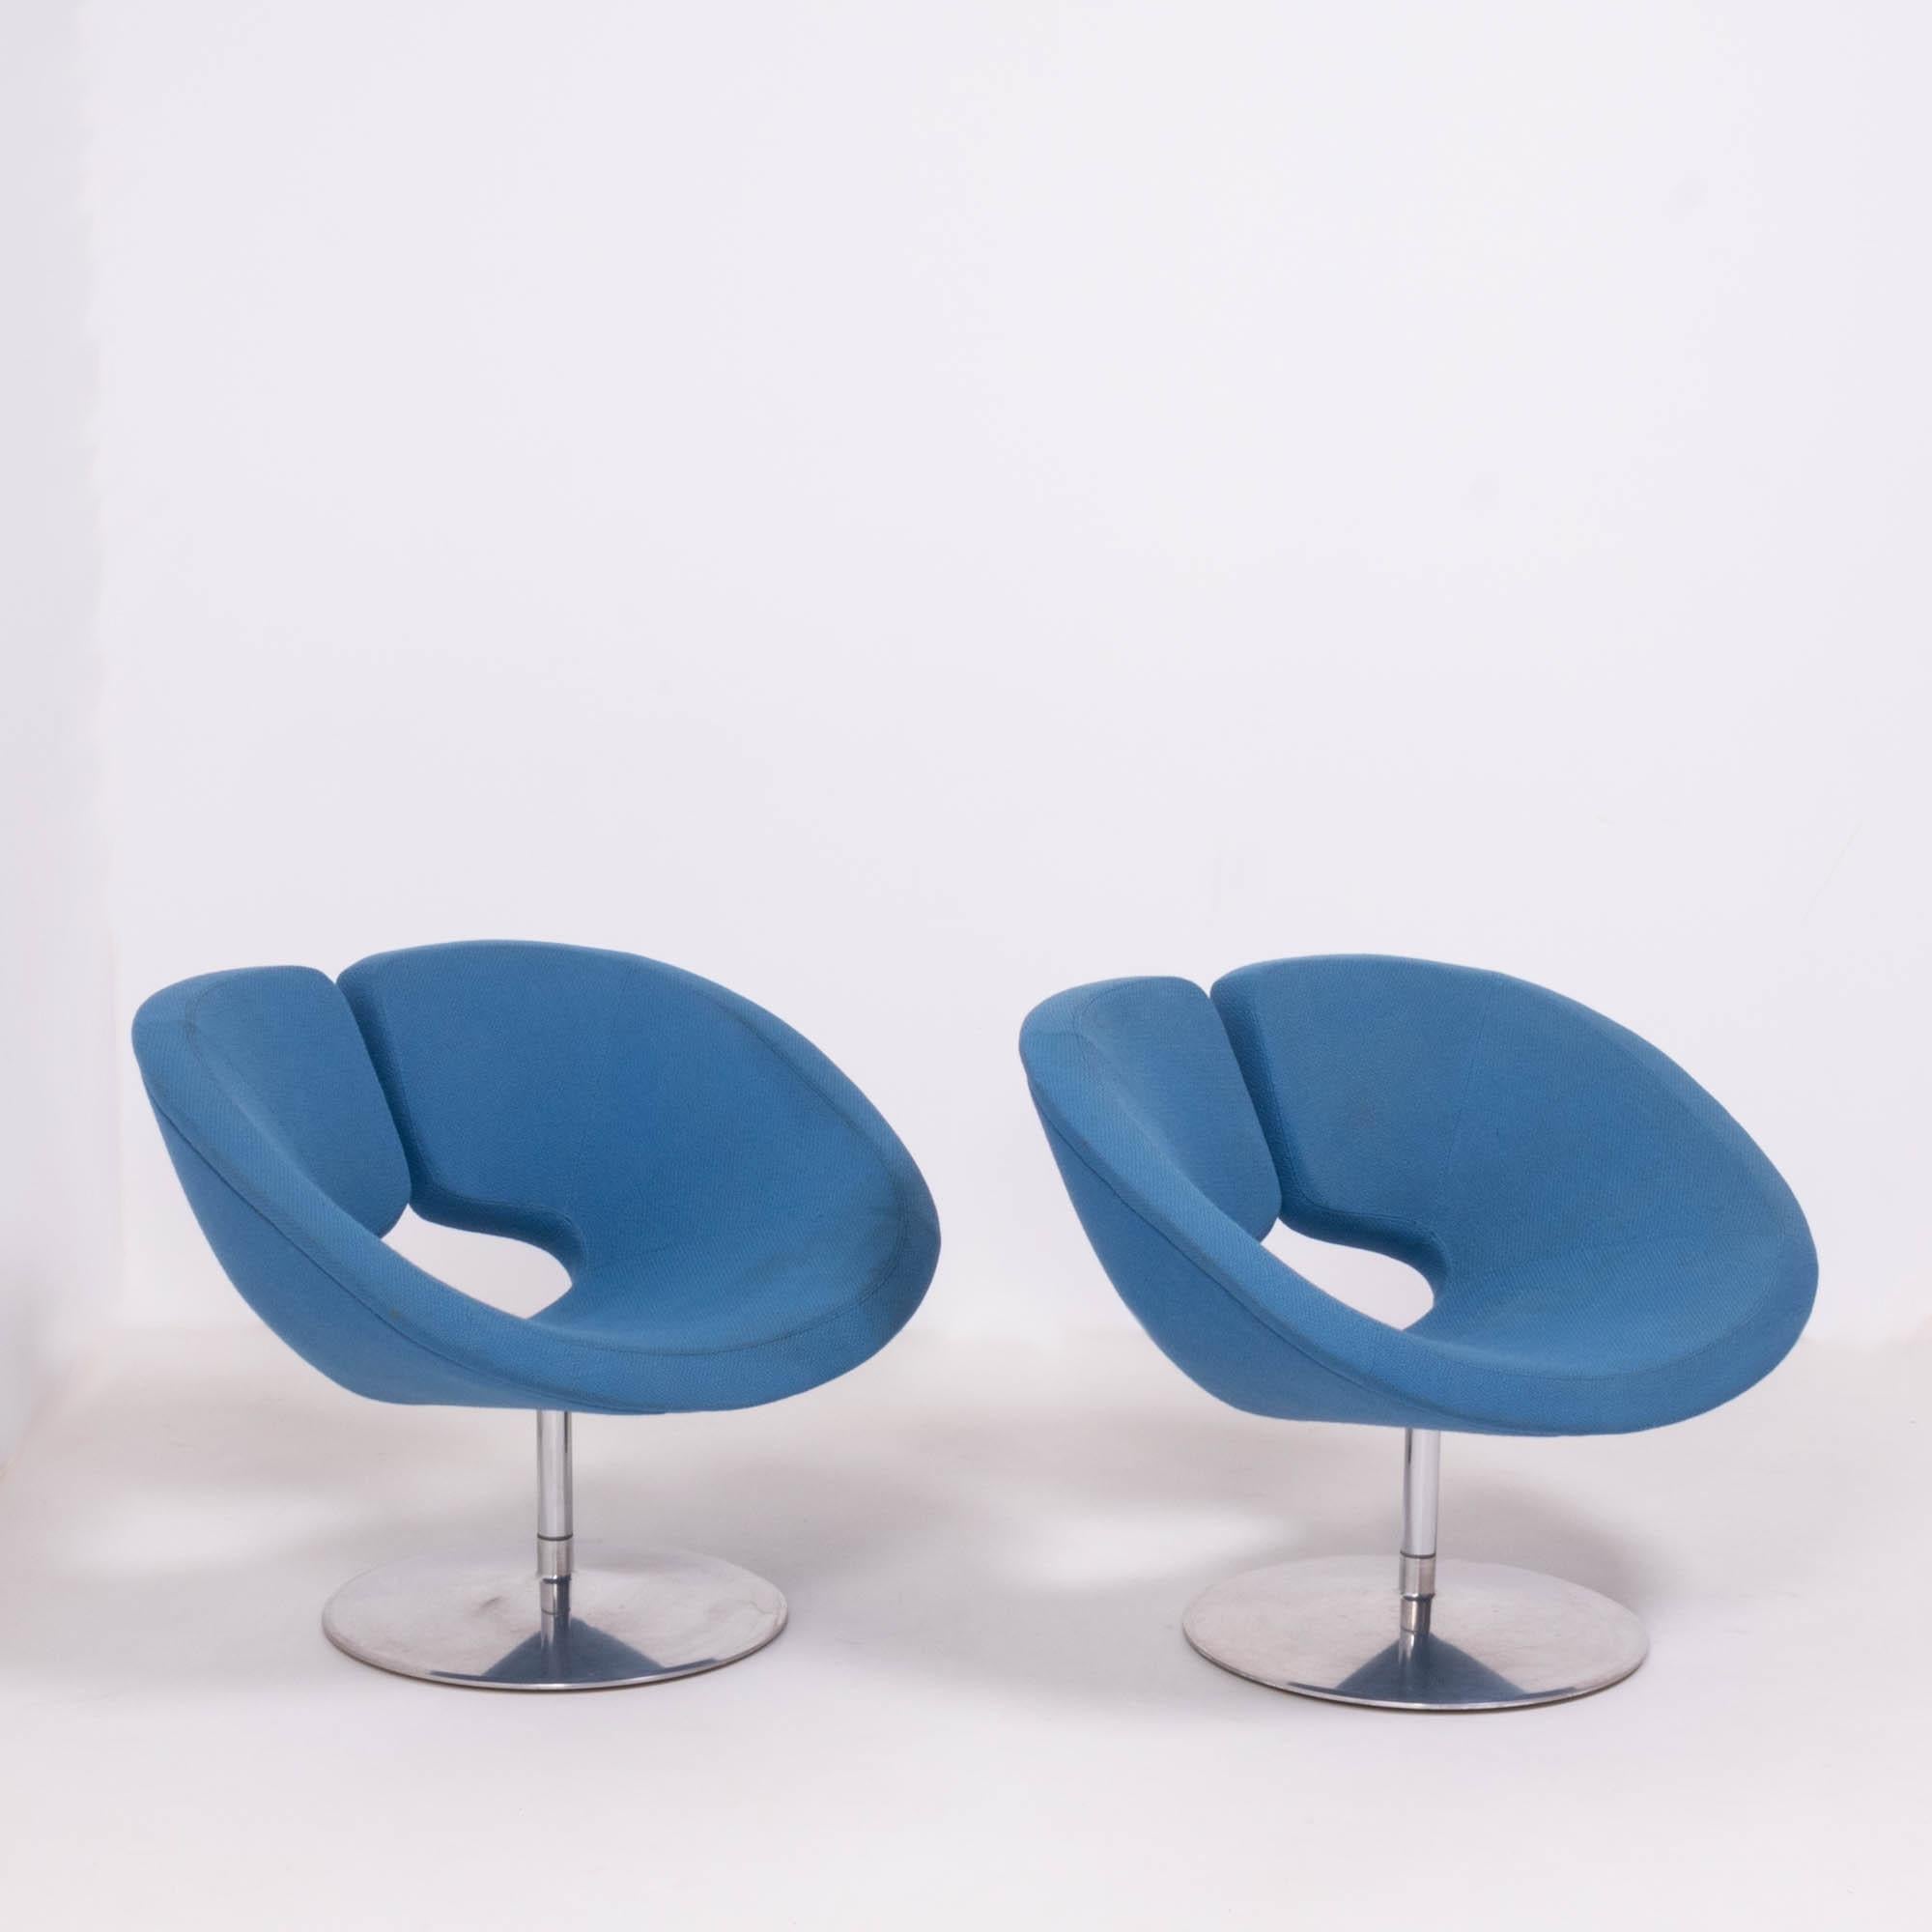 Originally designed in 2002 by Patrick Norguet for Artifort, these Apollo armchairs are a bold example of modern design.

The armchairs have a wide, sculptural form, creating a comfortable seat upholstered in a bright blue fabric.

They sit on